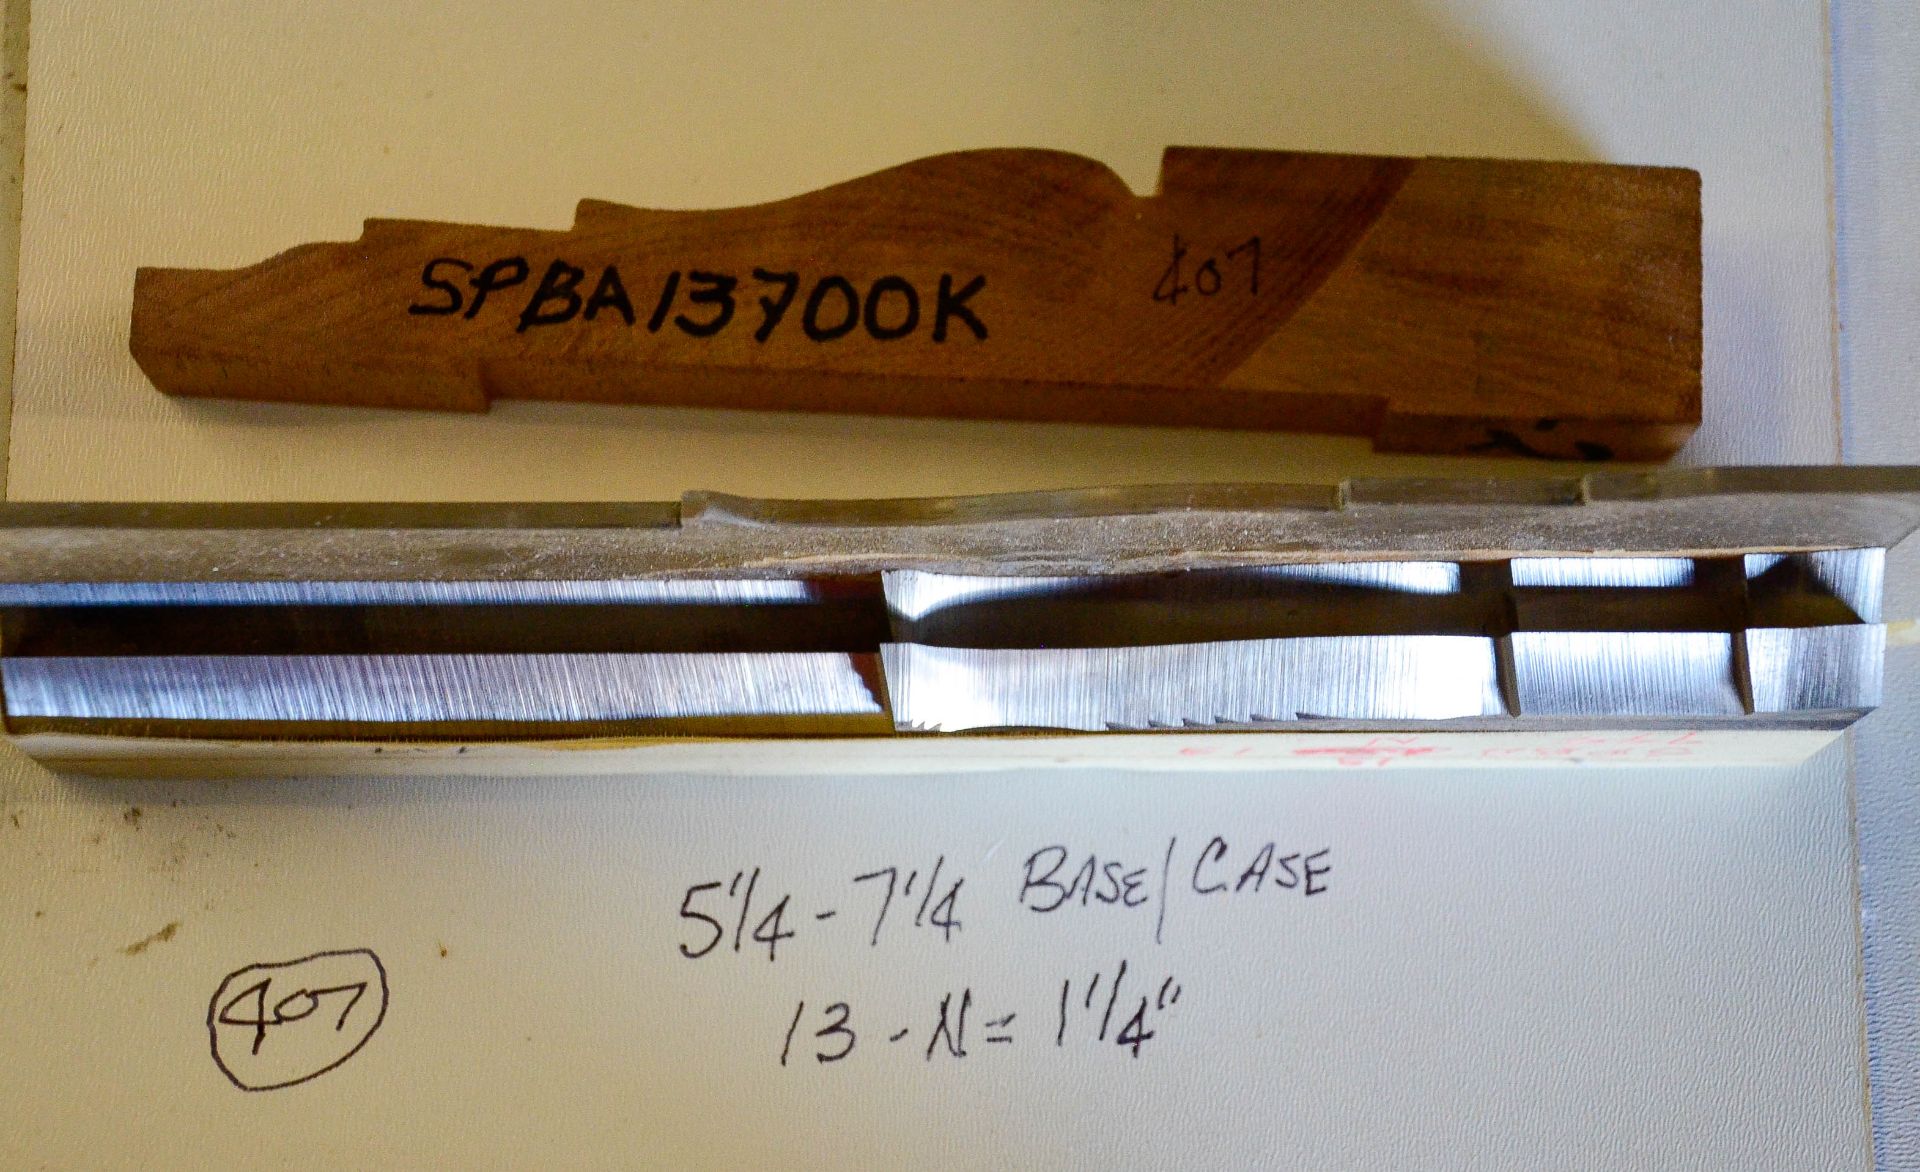 Moulding Knives, 5-1/4" - 7-1/4" Base/Case, 13-N = 1-1/4", Knives are in Good Condition and Ready - Image 2 of 2